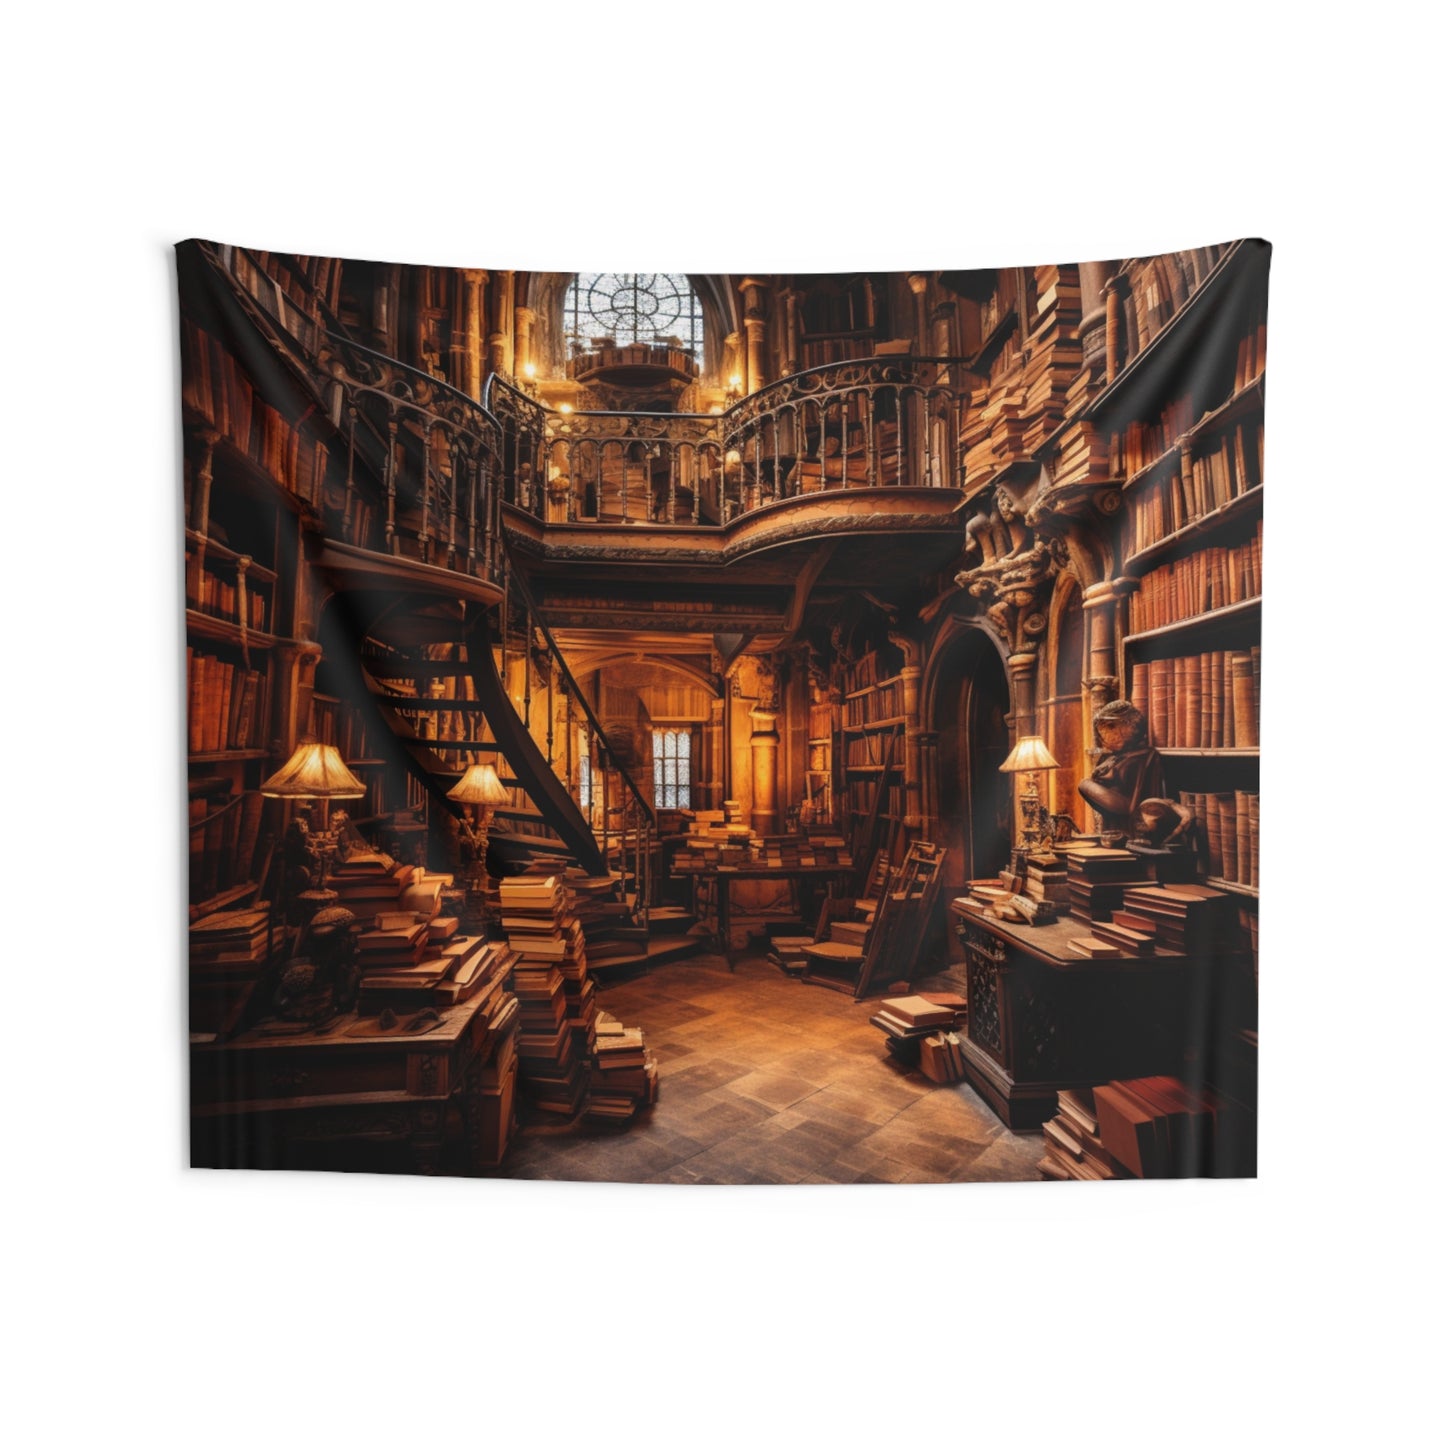 Vintage Library Tapestry, Retro Books Wall Art Hanging Cool Unique Landscape Aesthetic Large Small Decor Bedroom College Dorm Room Starcove Fashion